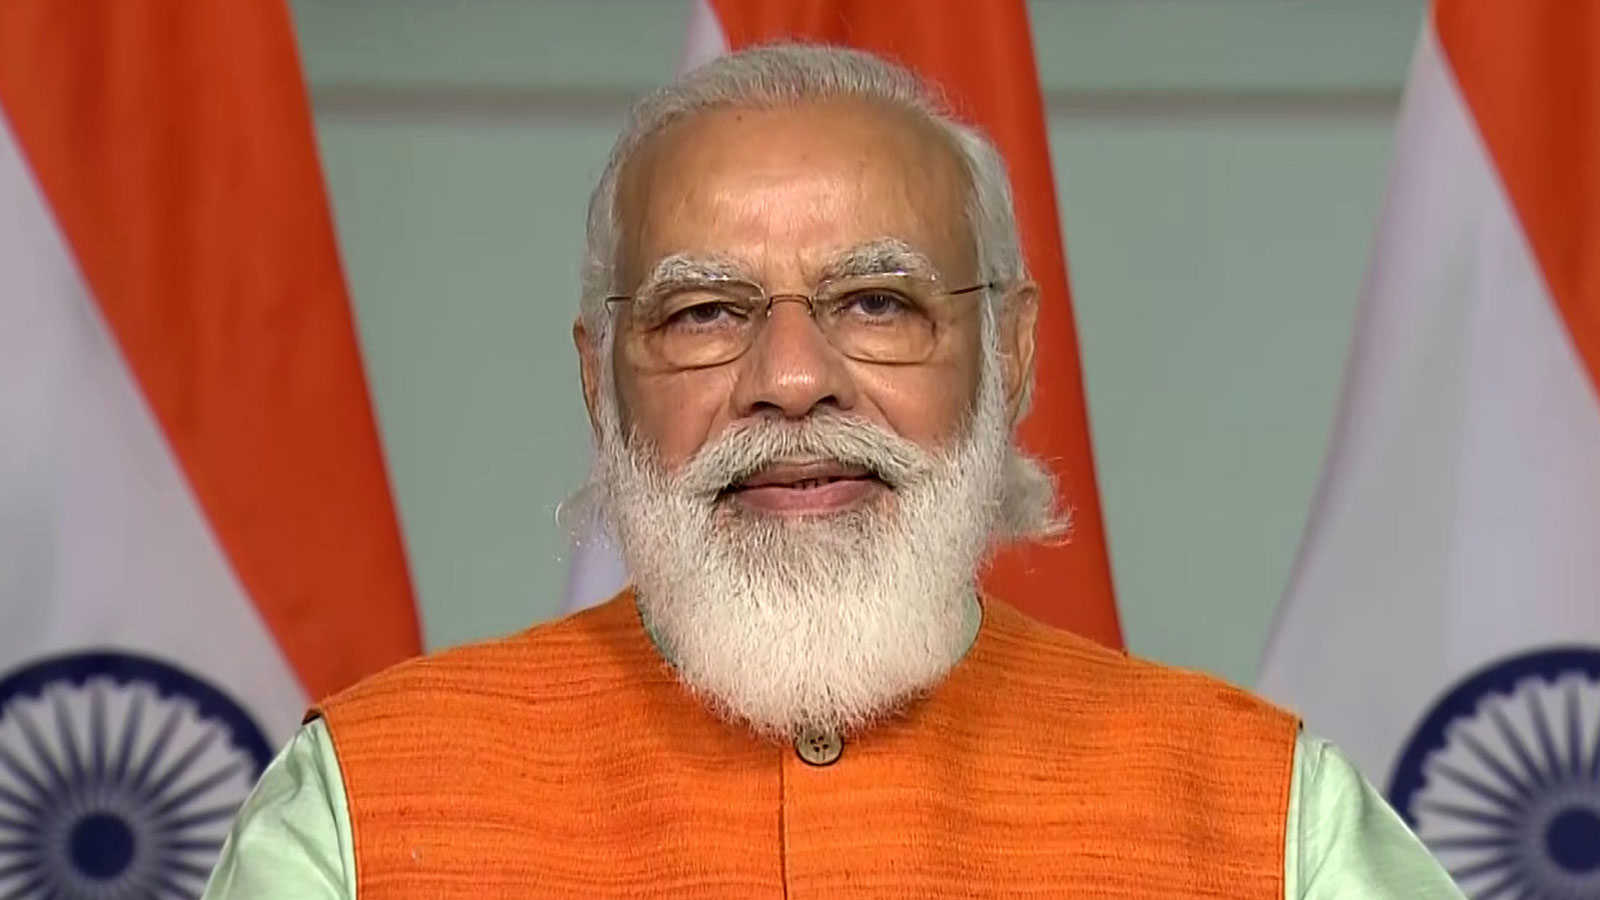 Mann ki Baat live updates: Agricultural reforms have opened new doors for farmers, PM says : Agriculture reforms brought new opportunities to farmers, they have bestowed new rights on them, says PM Modi on Mann Ki Baat. - The Times of India